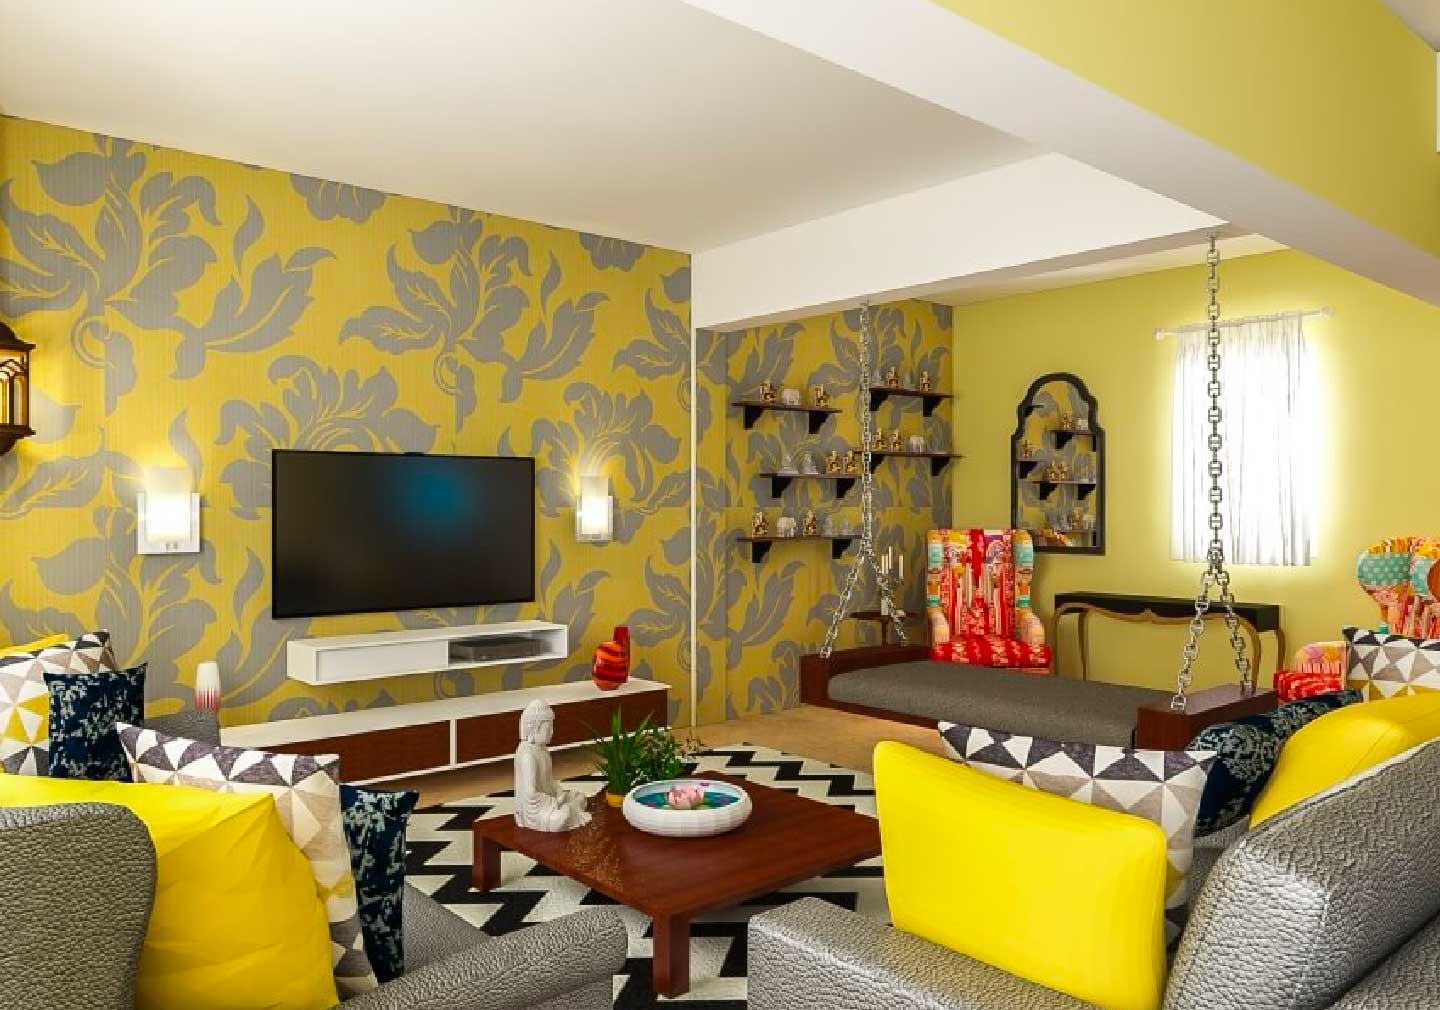 Wallpaper or paint for your Living Room Design